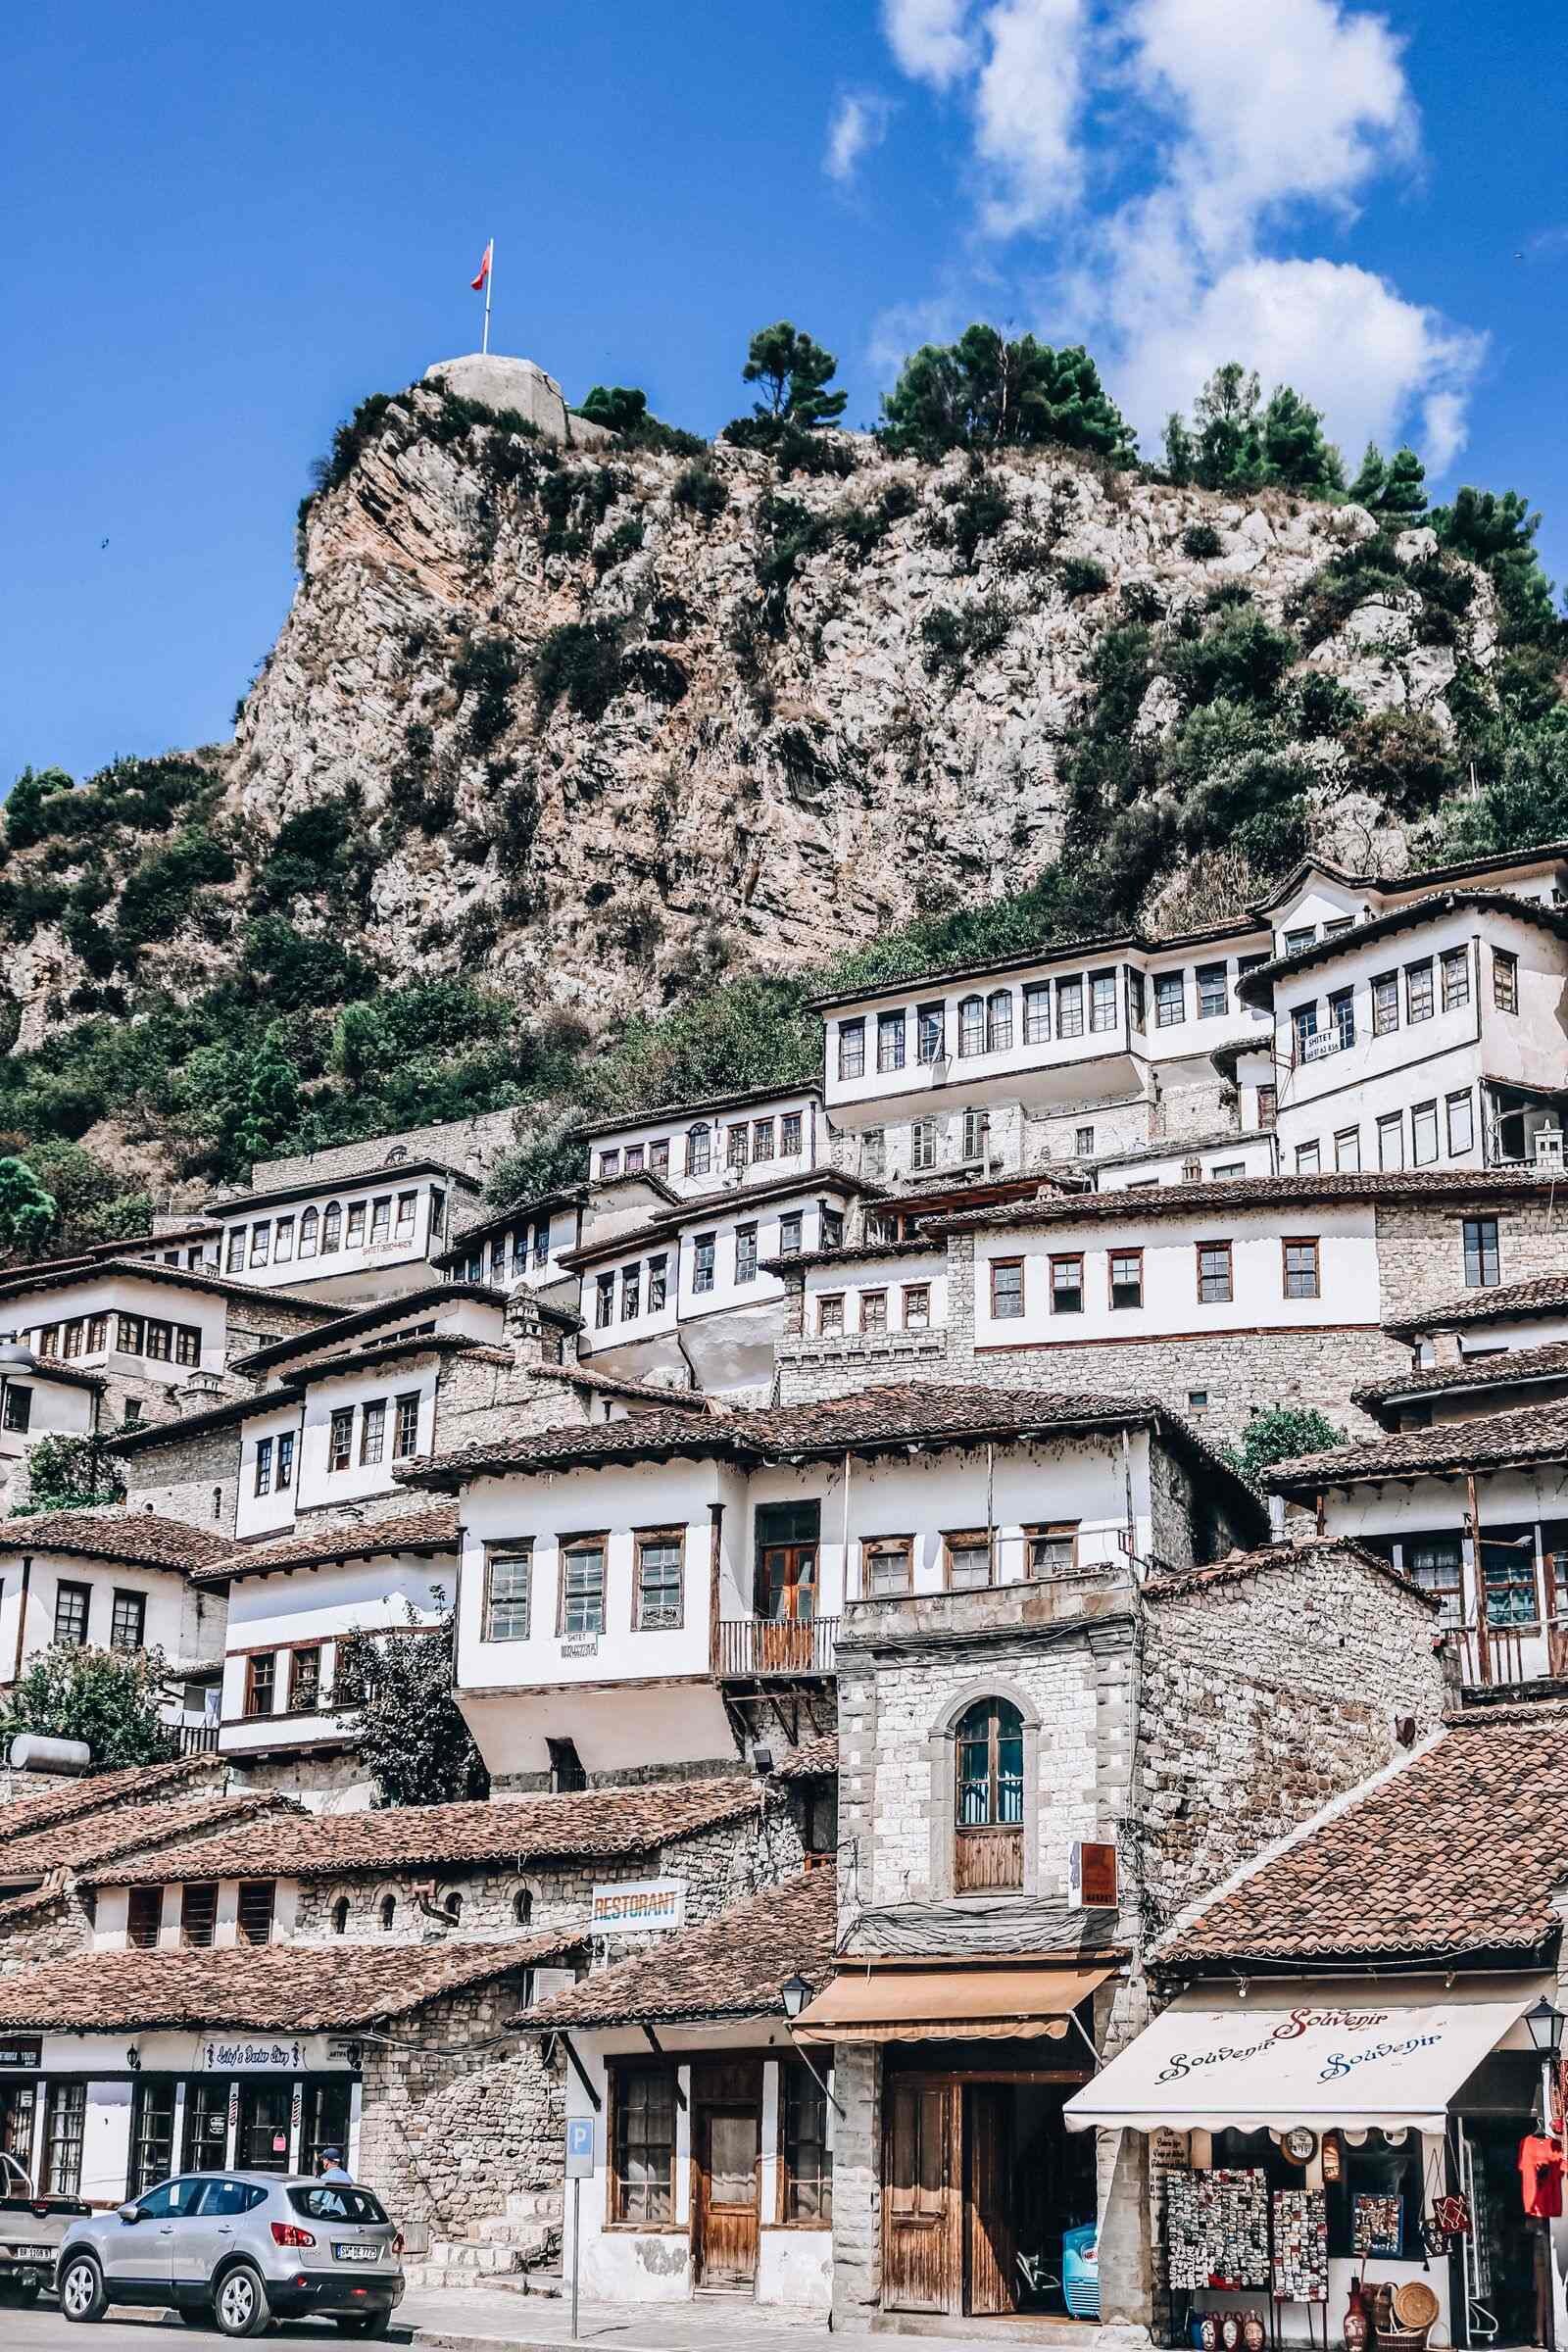 white houses built into the cliffside with a fortress on the top